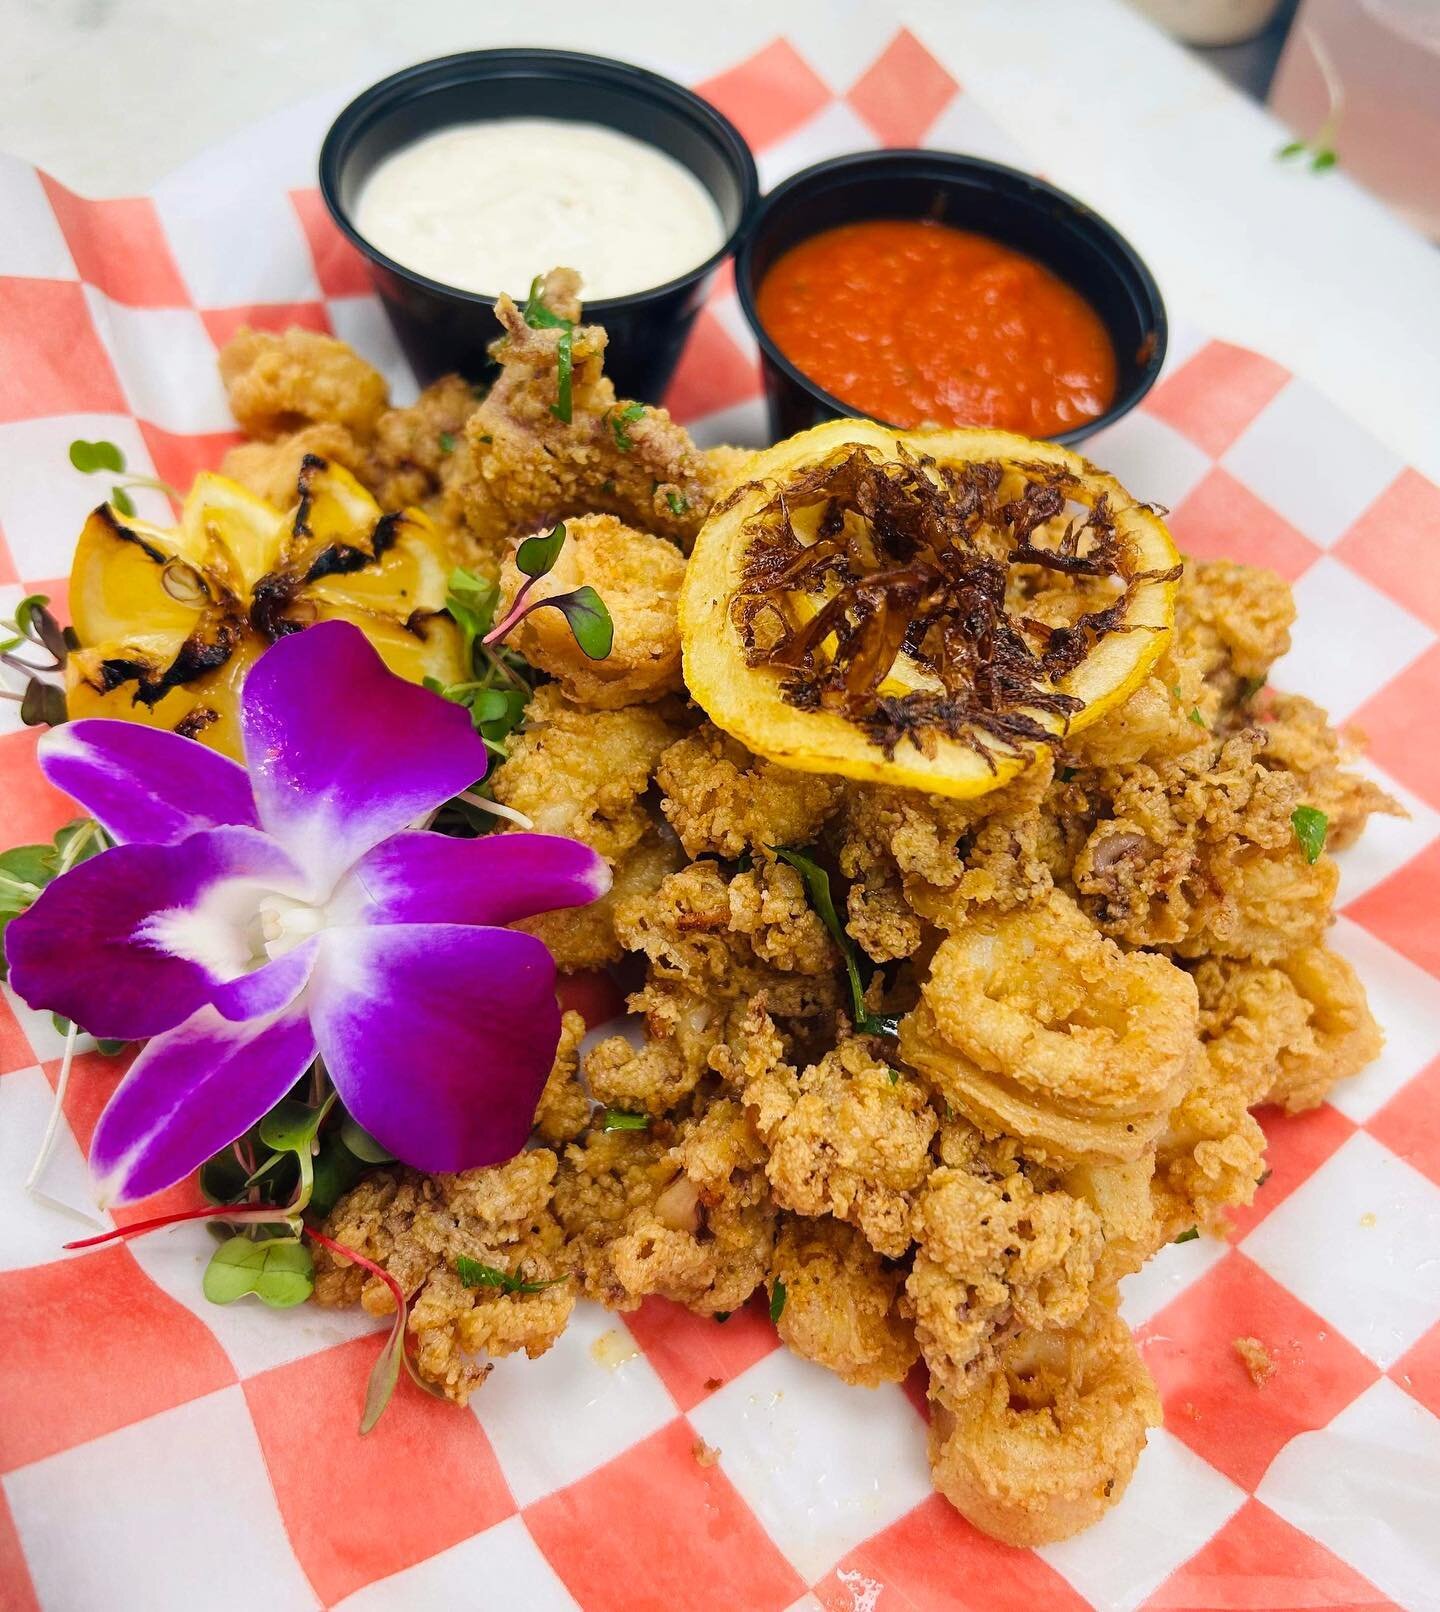 Our Fried Calamari is to die for &mdash; perfectly crisp and full of flavor 🦑 🌊

We will have live music from Tom Hood and the Tropical Sons this Friday, Saturday &amp; Sunday. Come join for the Fourth of July Weekend! 🇺🇸🎶

#hamptonbays #thehamp